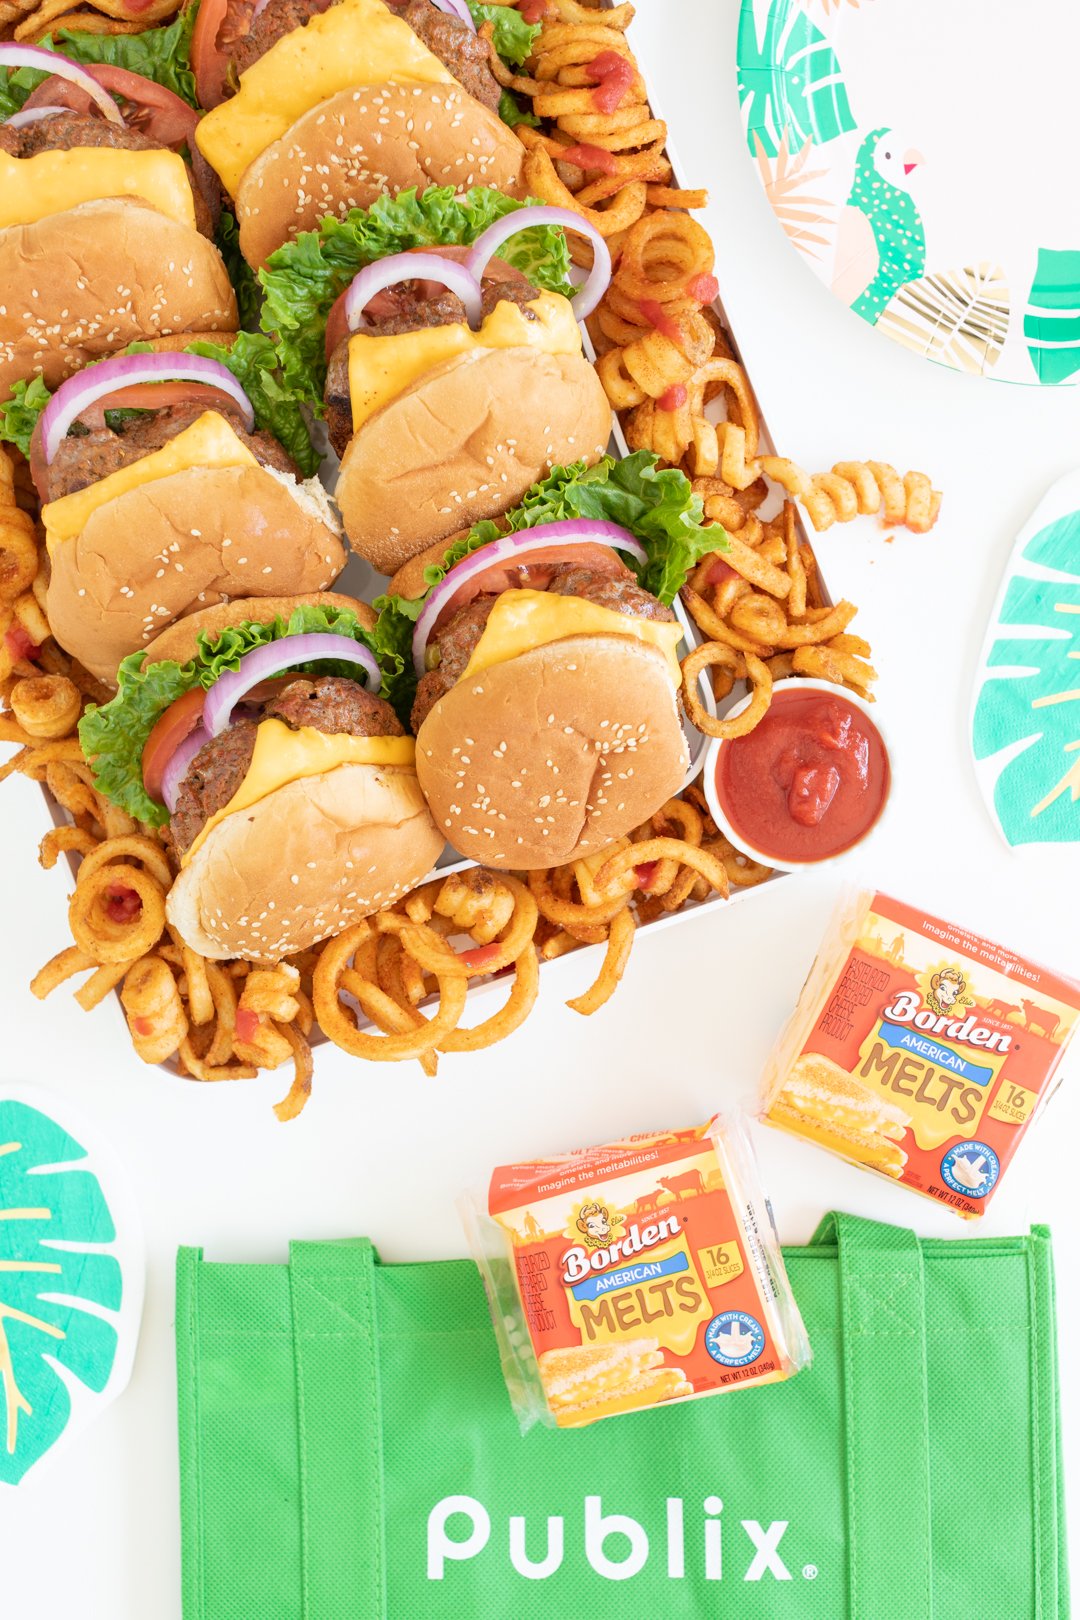 burger tray with curly fries shown with green publix reusable bag and packages of borden american melts